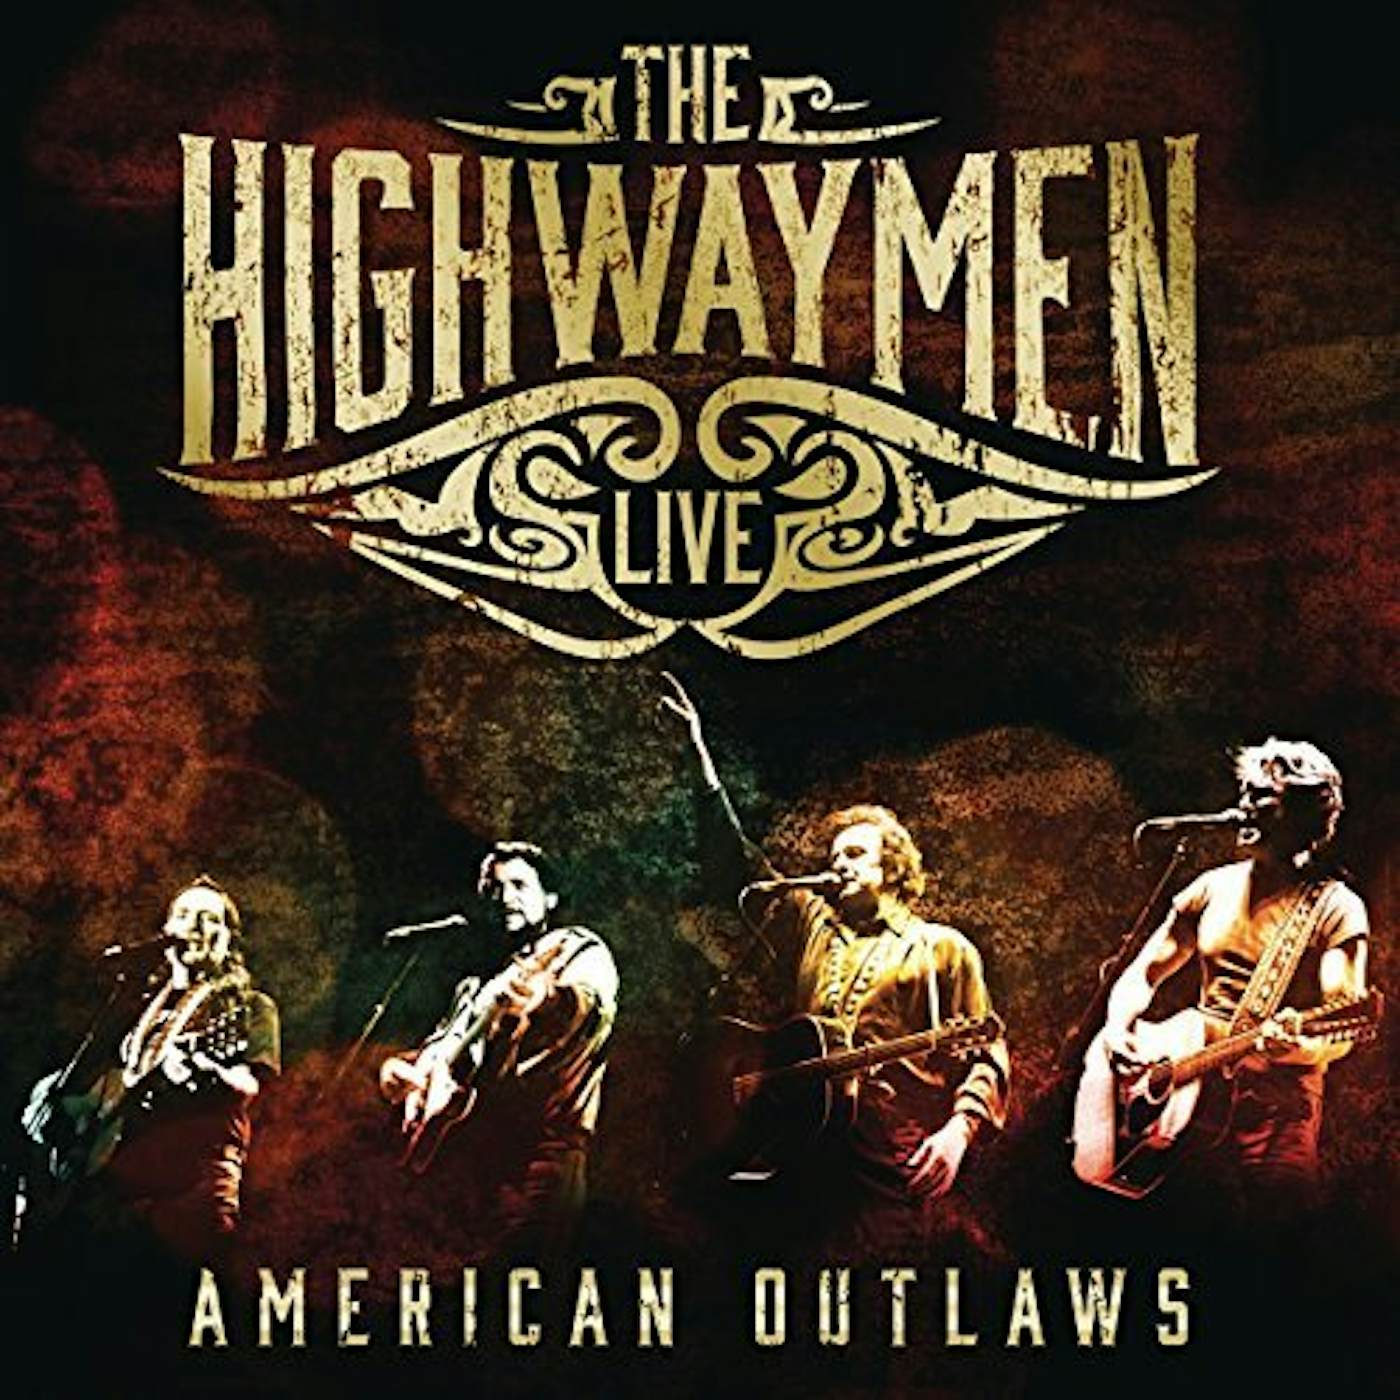 The Highwaymen Live: American Outlaws (3CD/DVD) Box Set